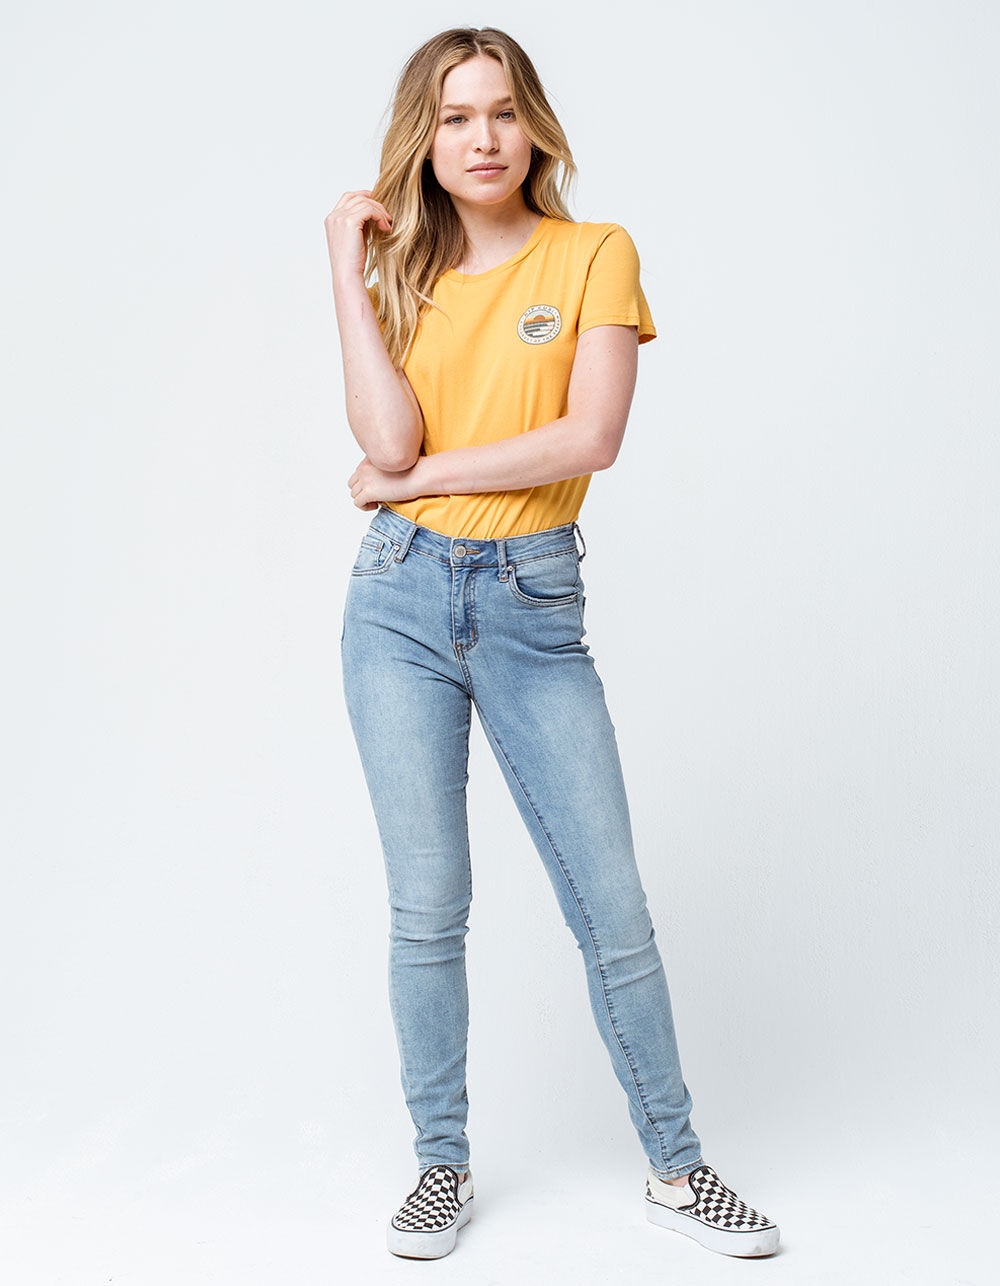 RIP CURL Sunset Search Yellow Womens Tee - YELLOW | Tillys